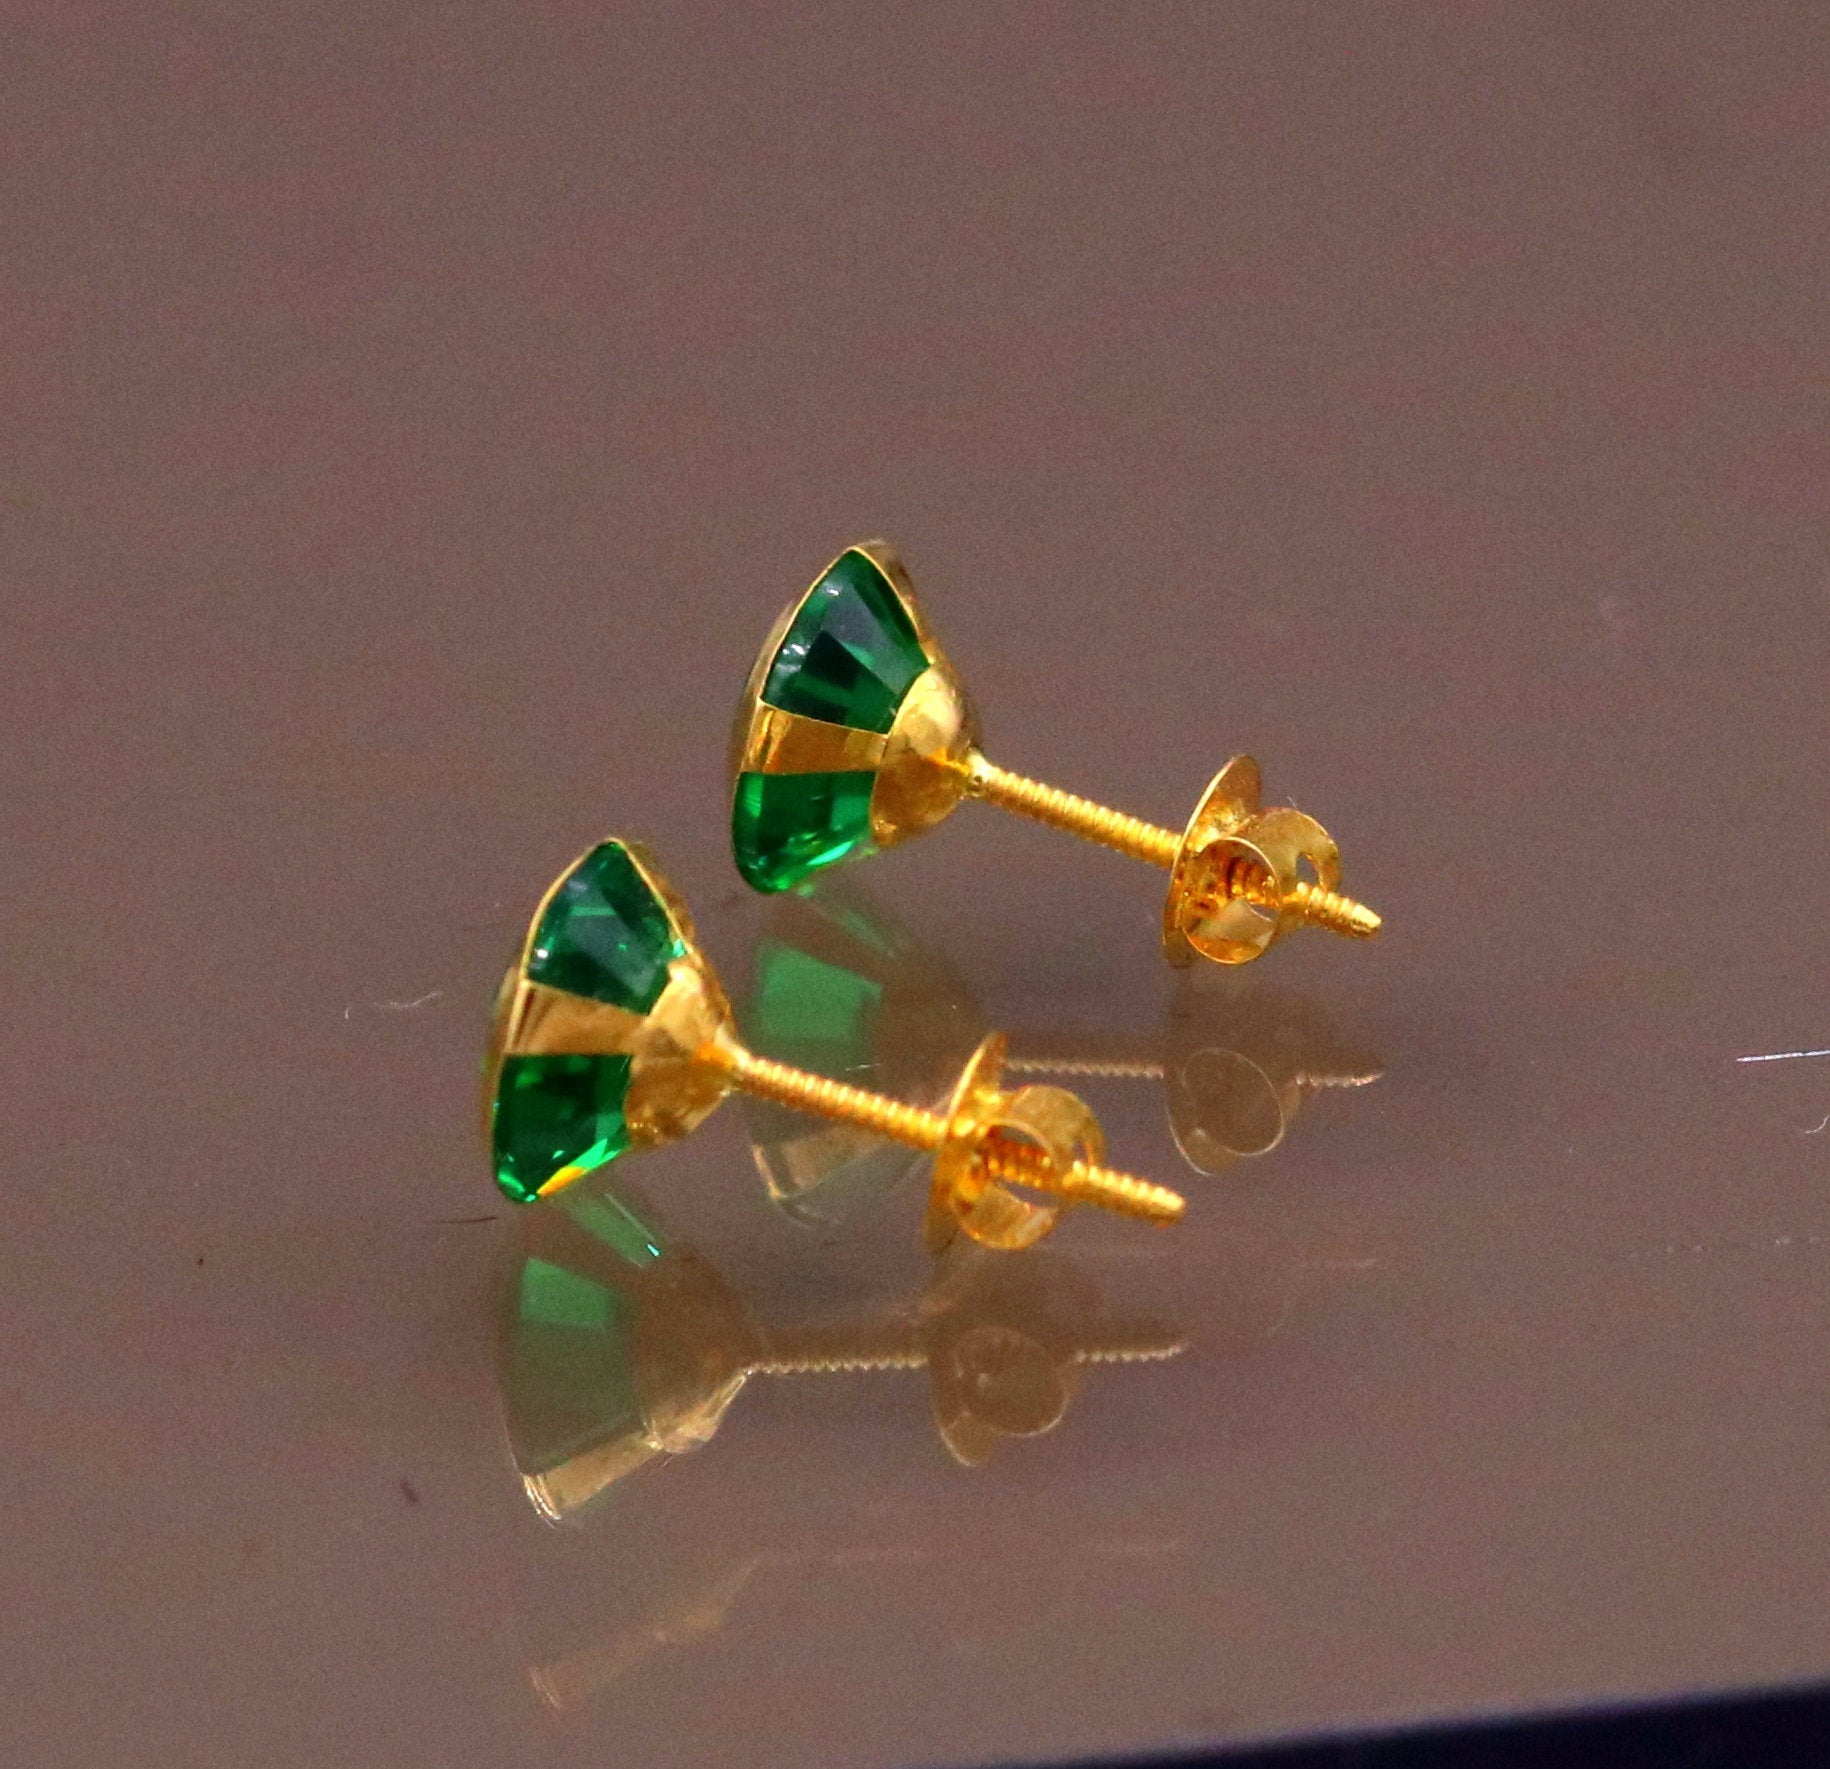 Genuine 18k yellow gold handmade fabulous green stone excellent antique vintage design stud earrings pair unisex jewelry er86 - TRIBAL ORNAMENTS